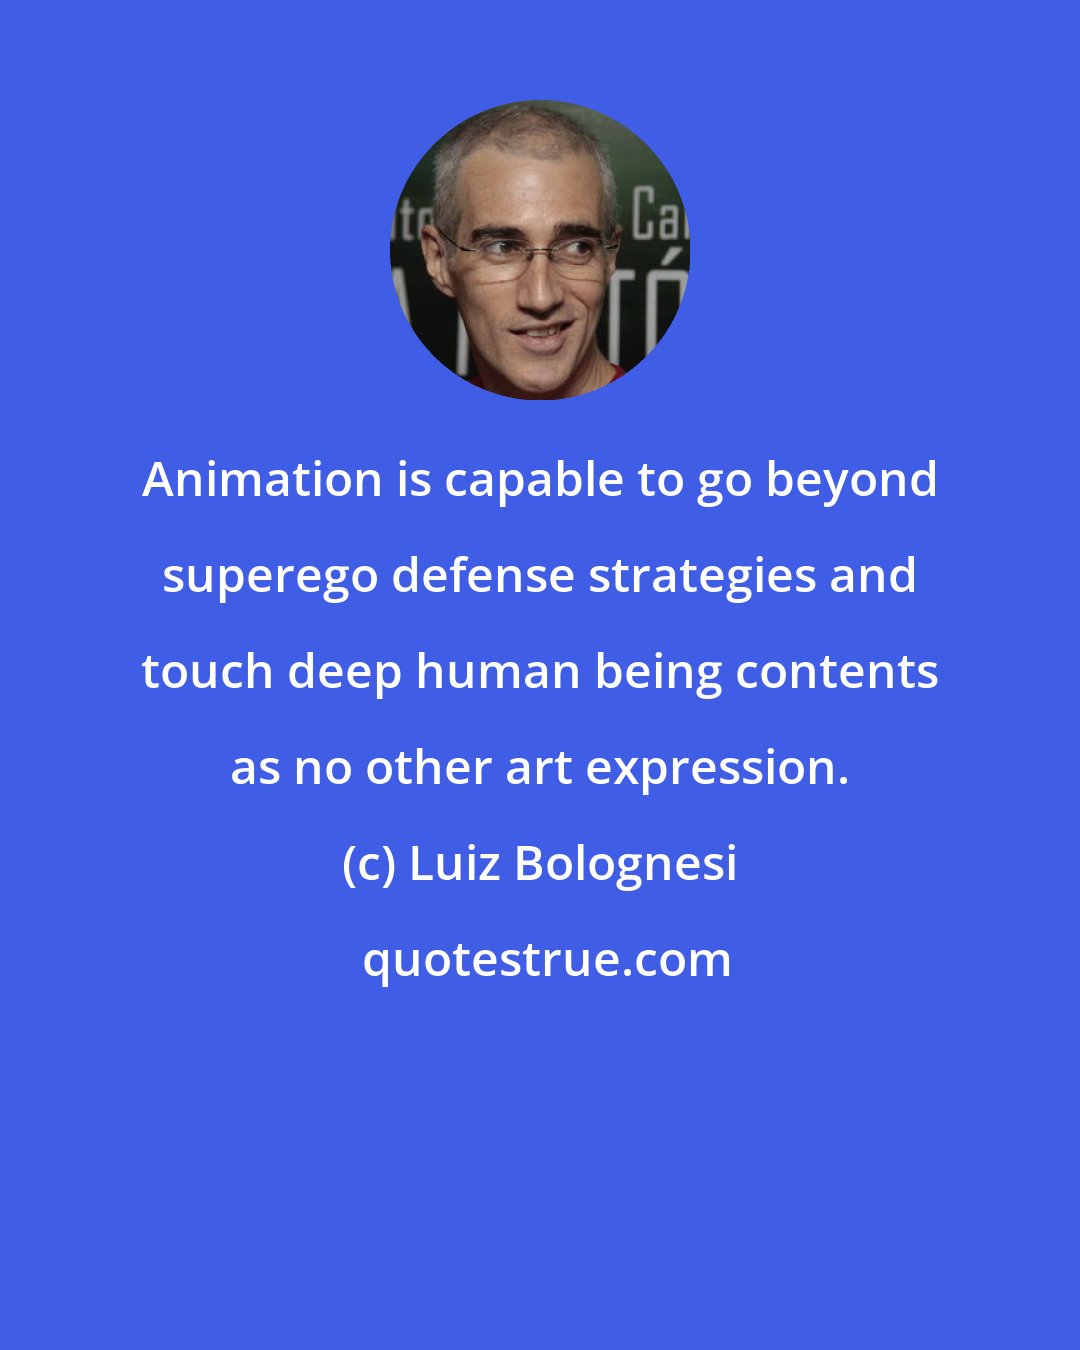 Luiz Bolognesi: Animation is capable to go beyond superego defense strategies and touch deep human being contents as no other art expression.